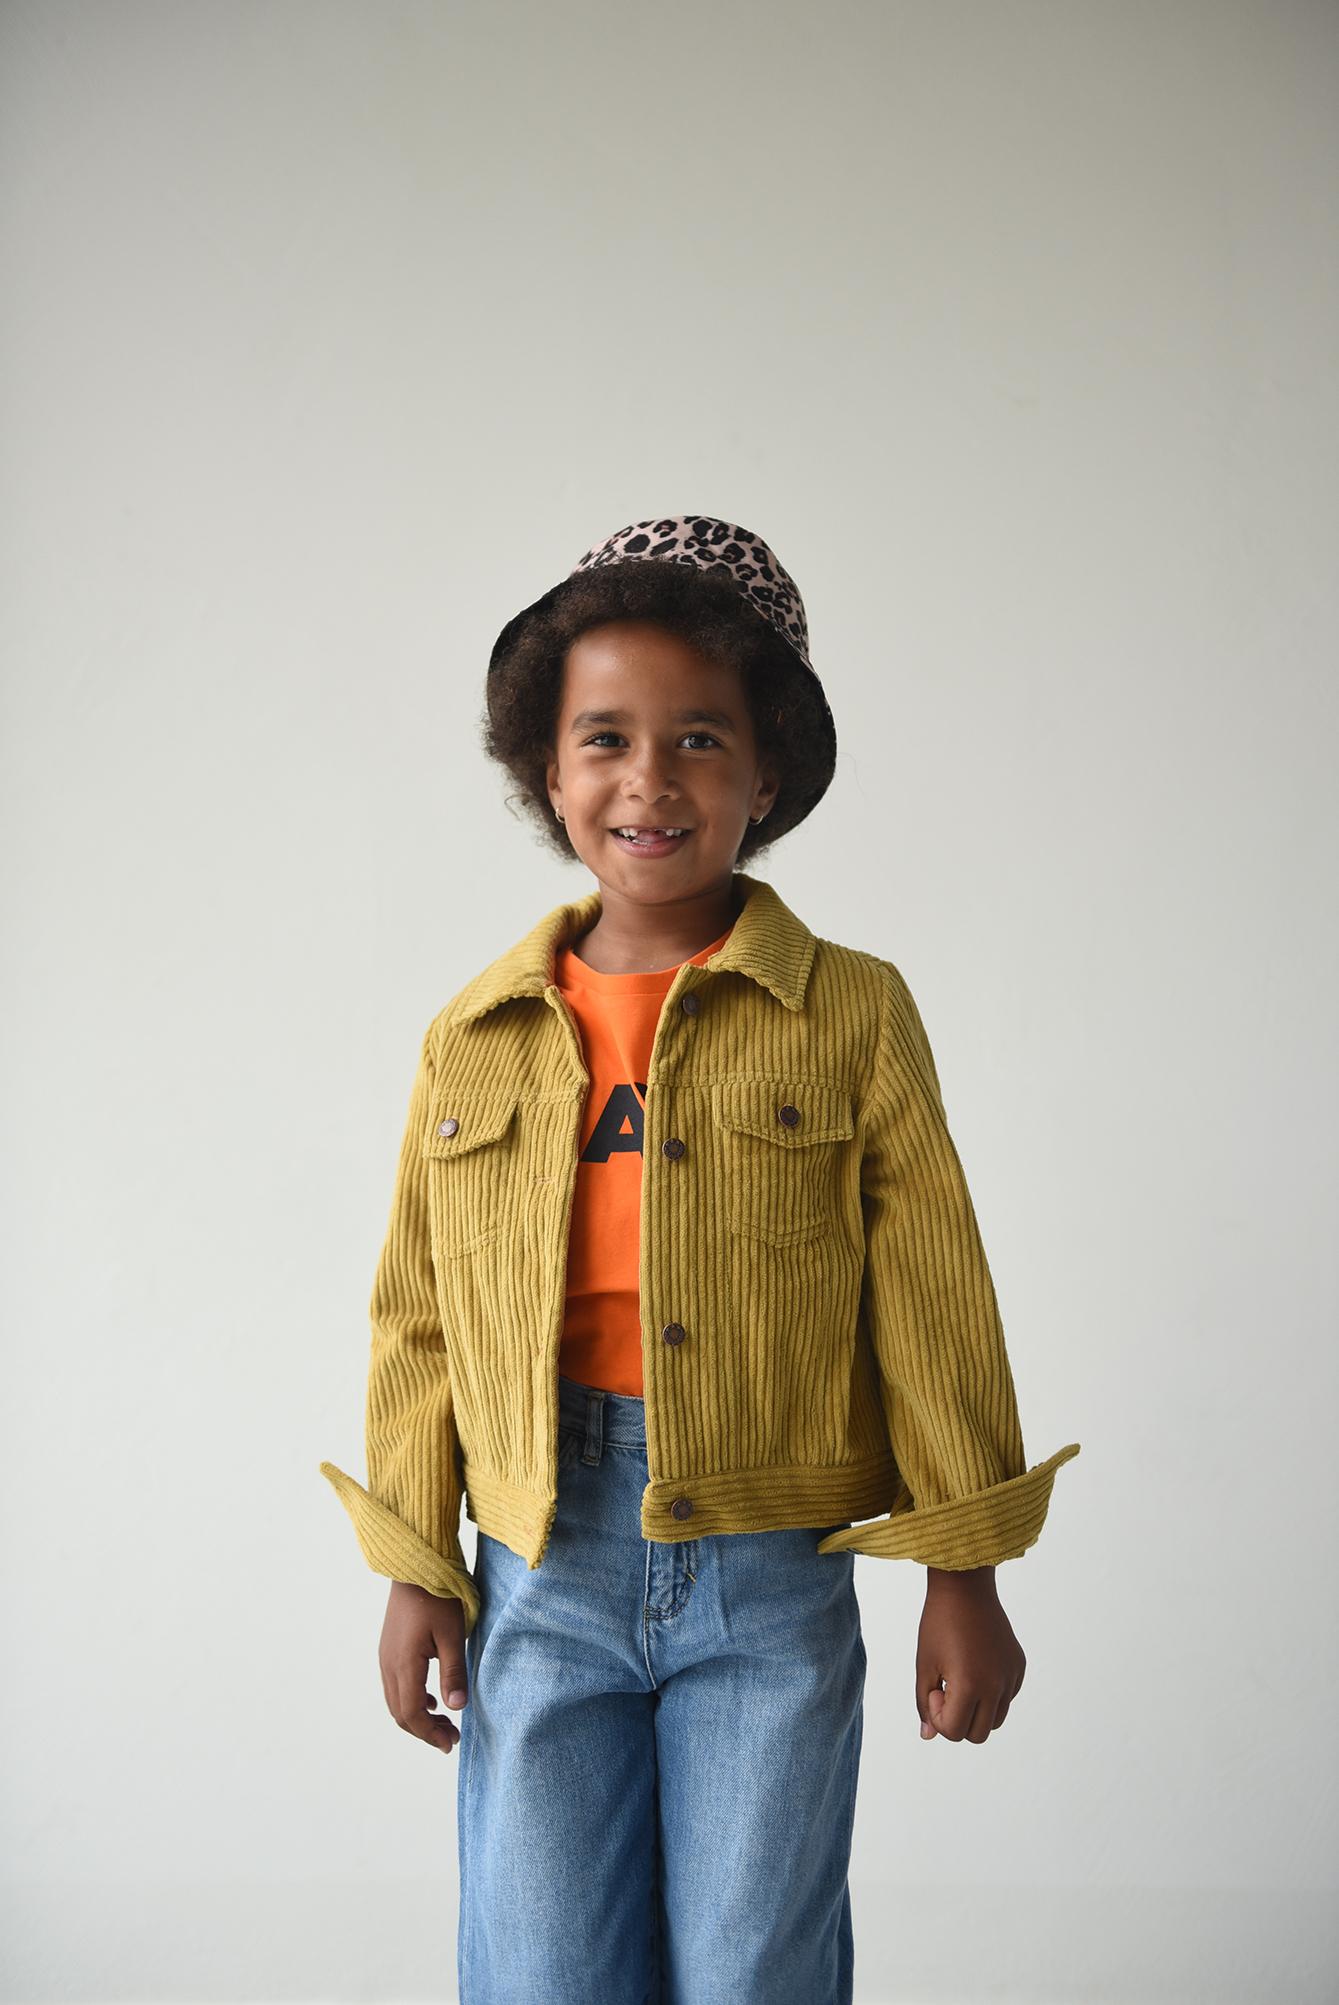 Child wearing the Child/Teen Legend Jacket sewing pattern from Fibre Mood on The Fold Line. A jacket pattern made in corduroy, cotton or denim fabrics, featuring a cropped length, two chest pockets, collar, snaps/jeans buttons fastening and full length sleeves with button/snap fastening.